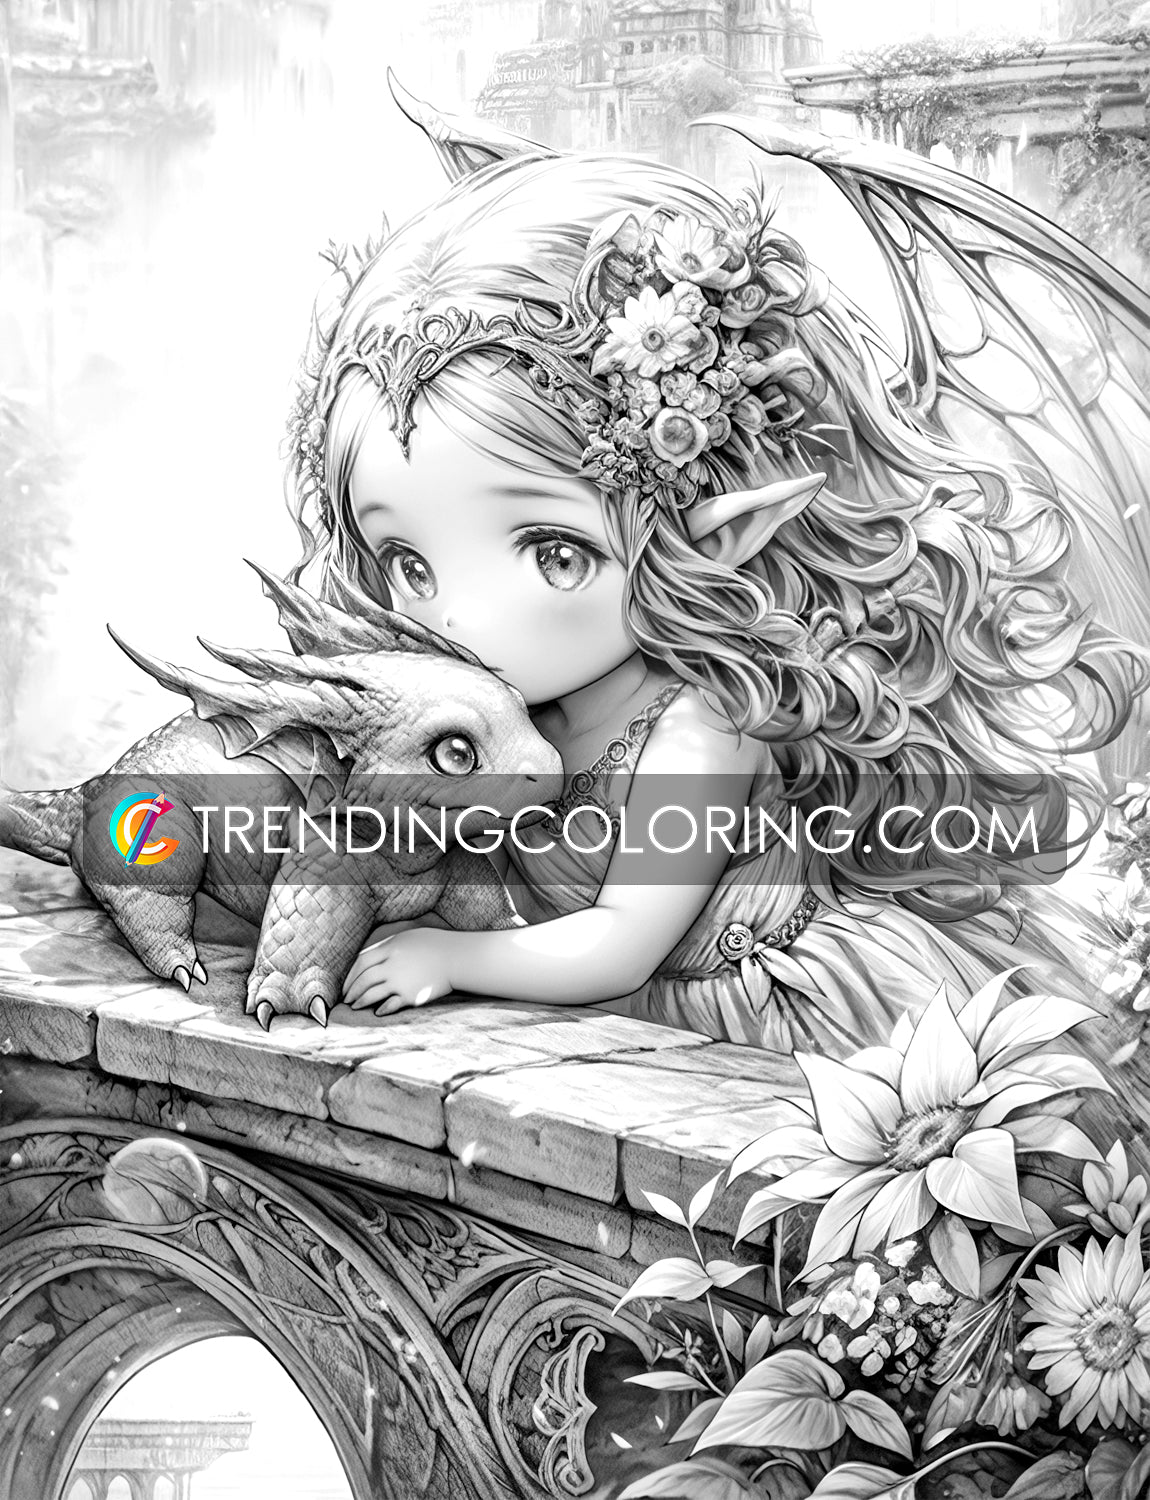 35 Fairies & Dragons 2 Grayscale Coloring Pages - Instant Download - Printable